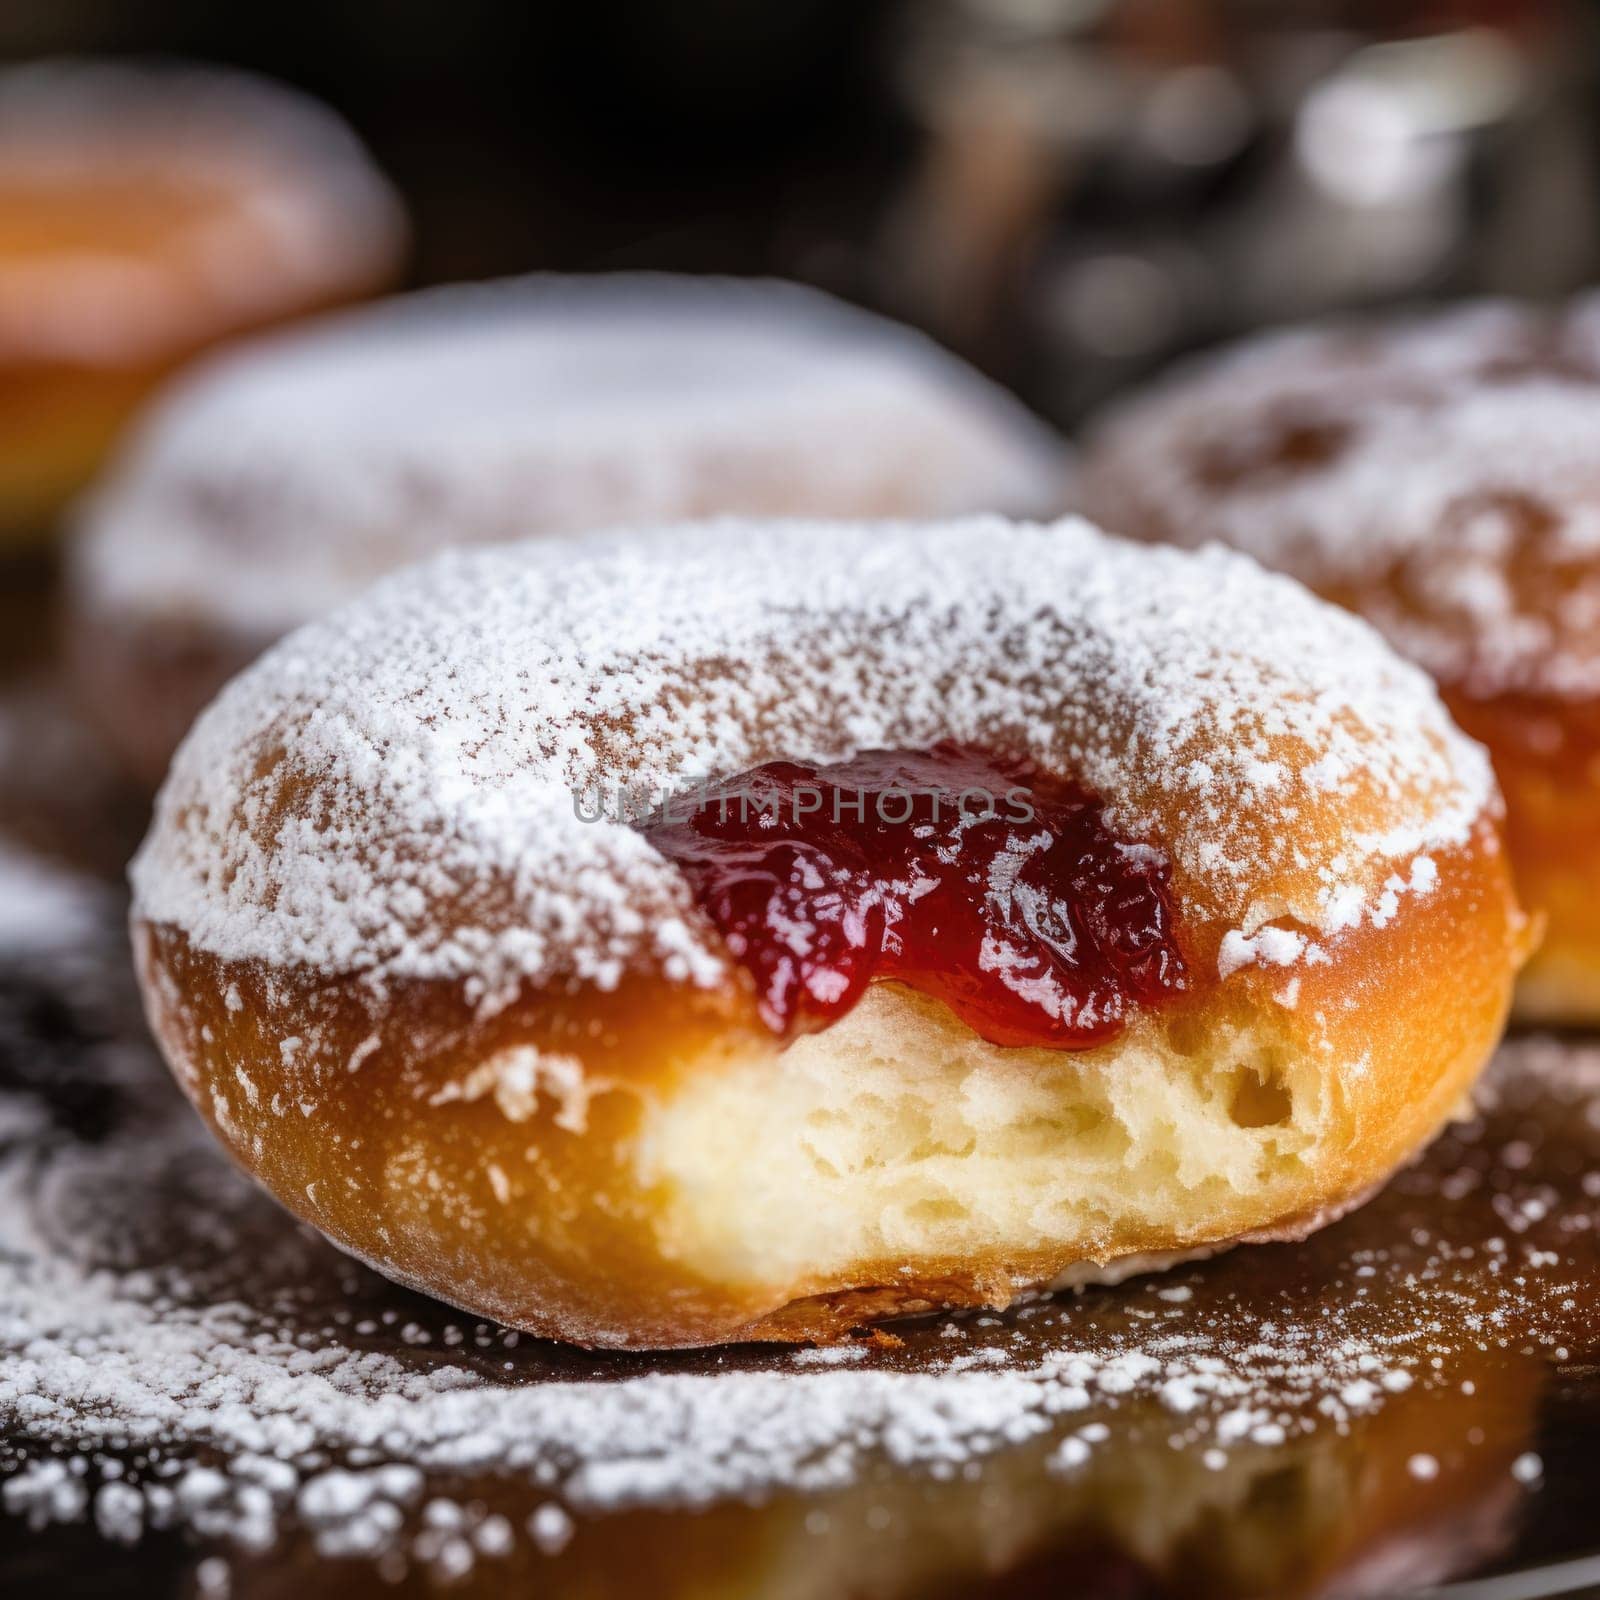 A close up of a donut with powdered sugar and jam